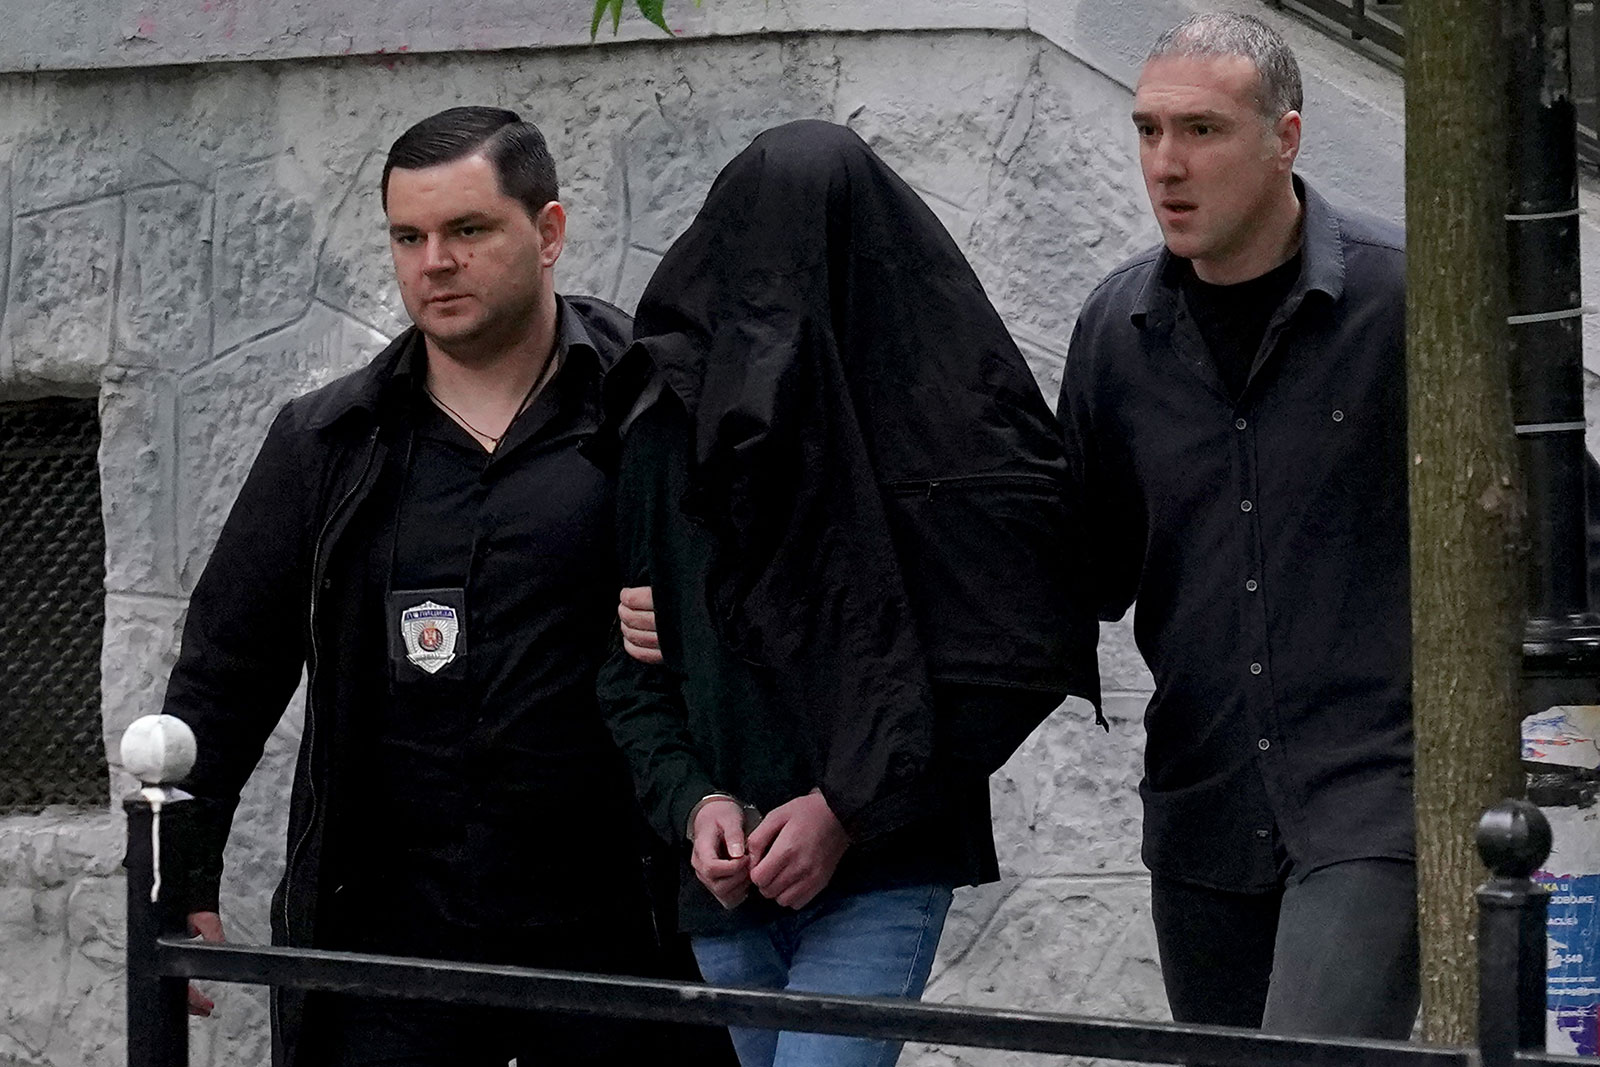 Police officers escort a person suspected of firing several shots at a school in the capital of Belgrade on May 3.